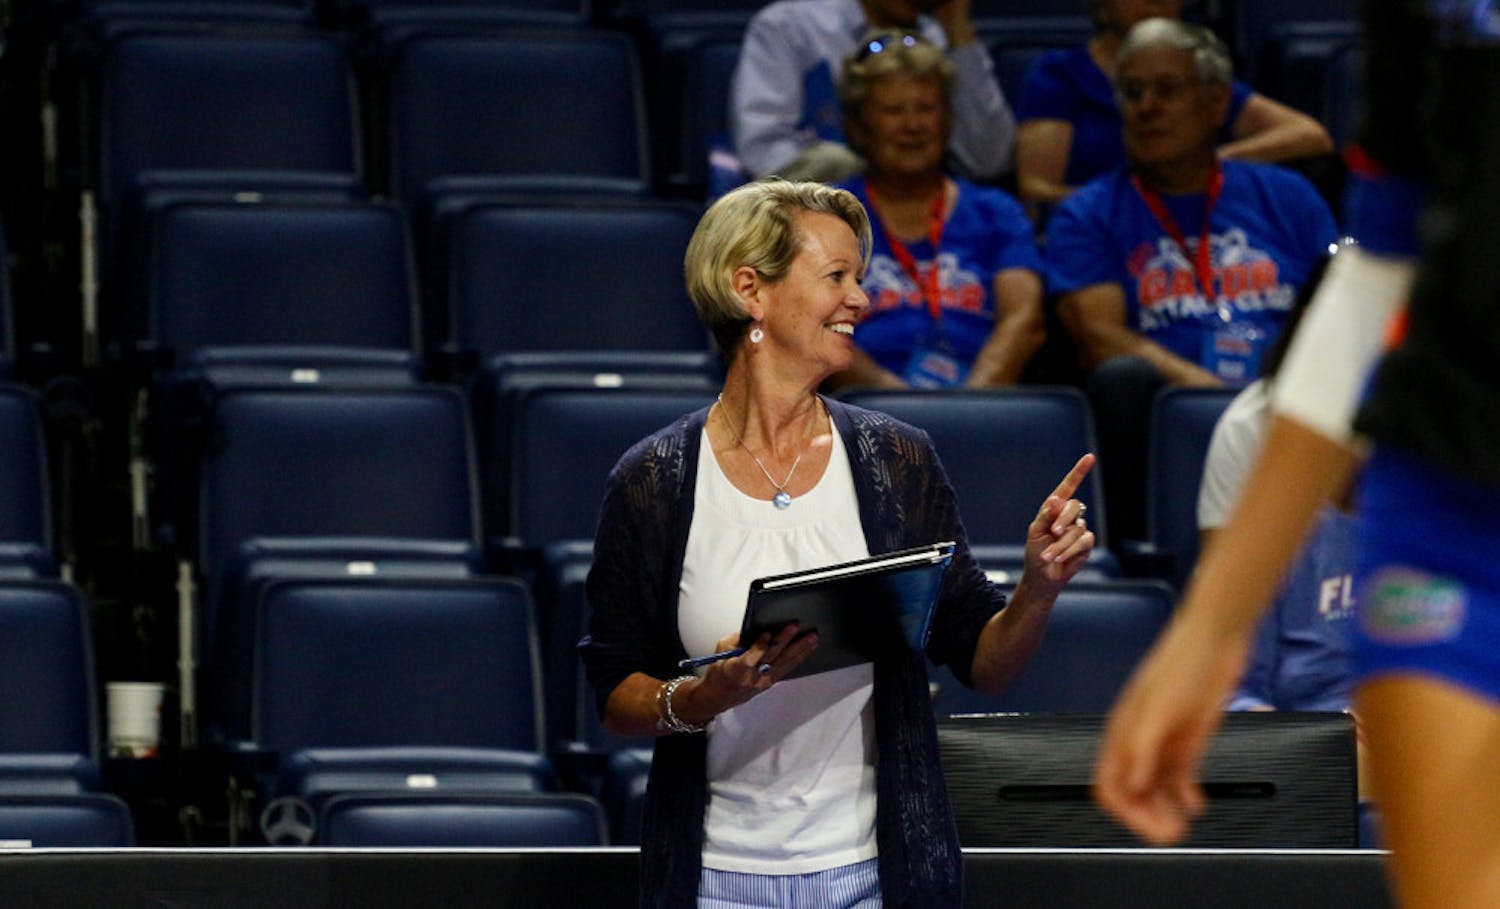 UF coach Mary Wise smiles during Florida's 3-0 win against Florida A&M on Sept. 15, 2017, in the O'Connell Center.